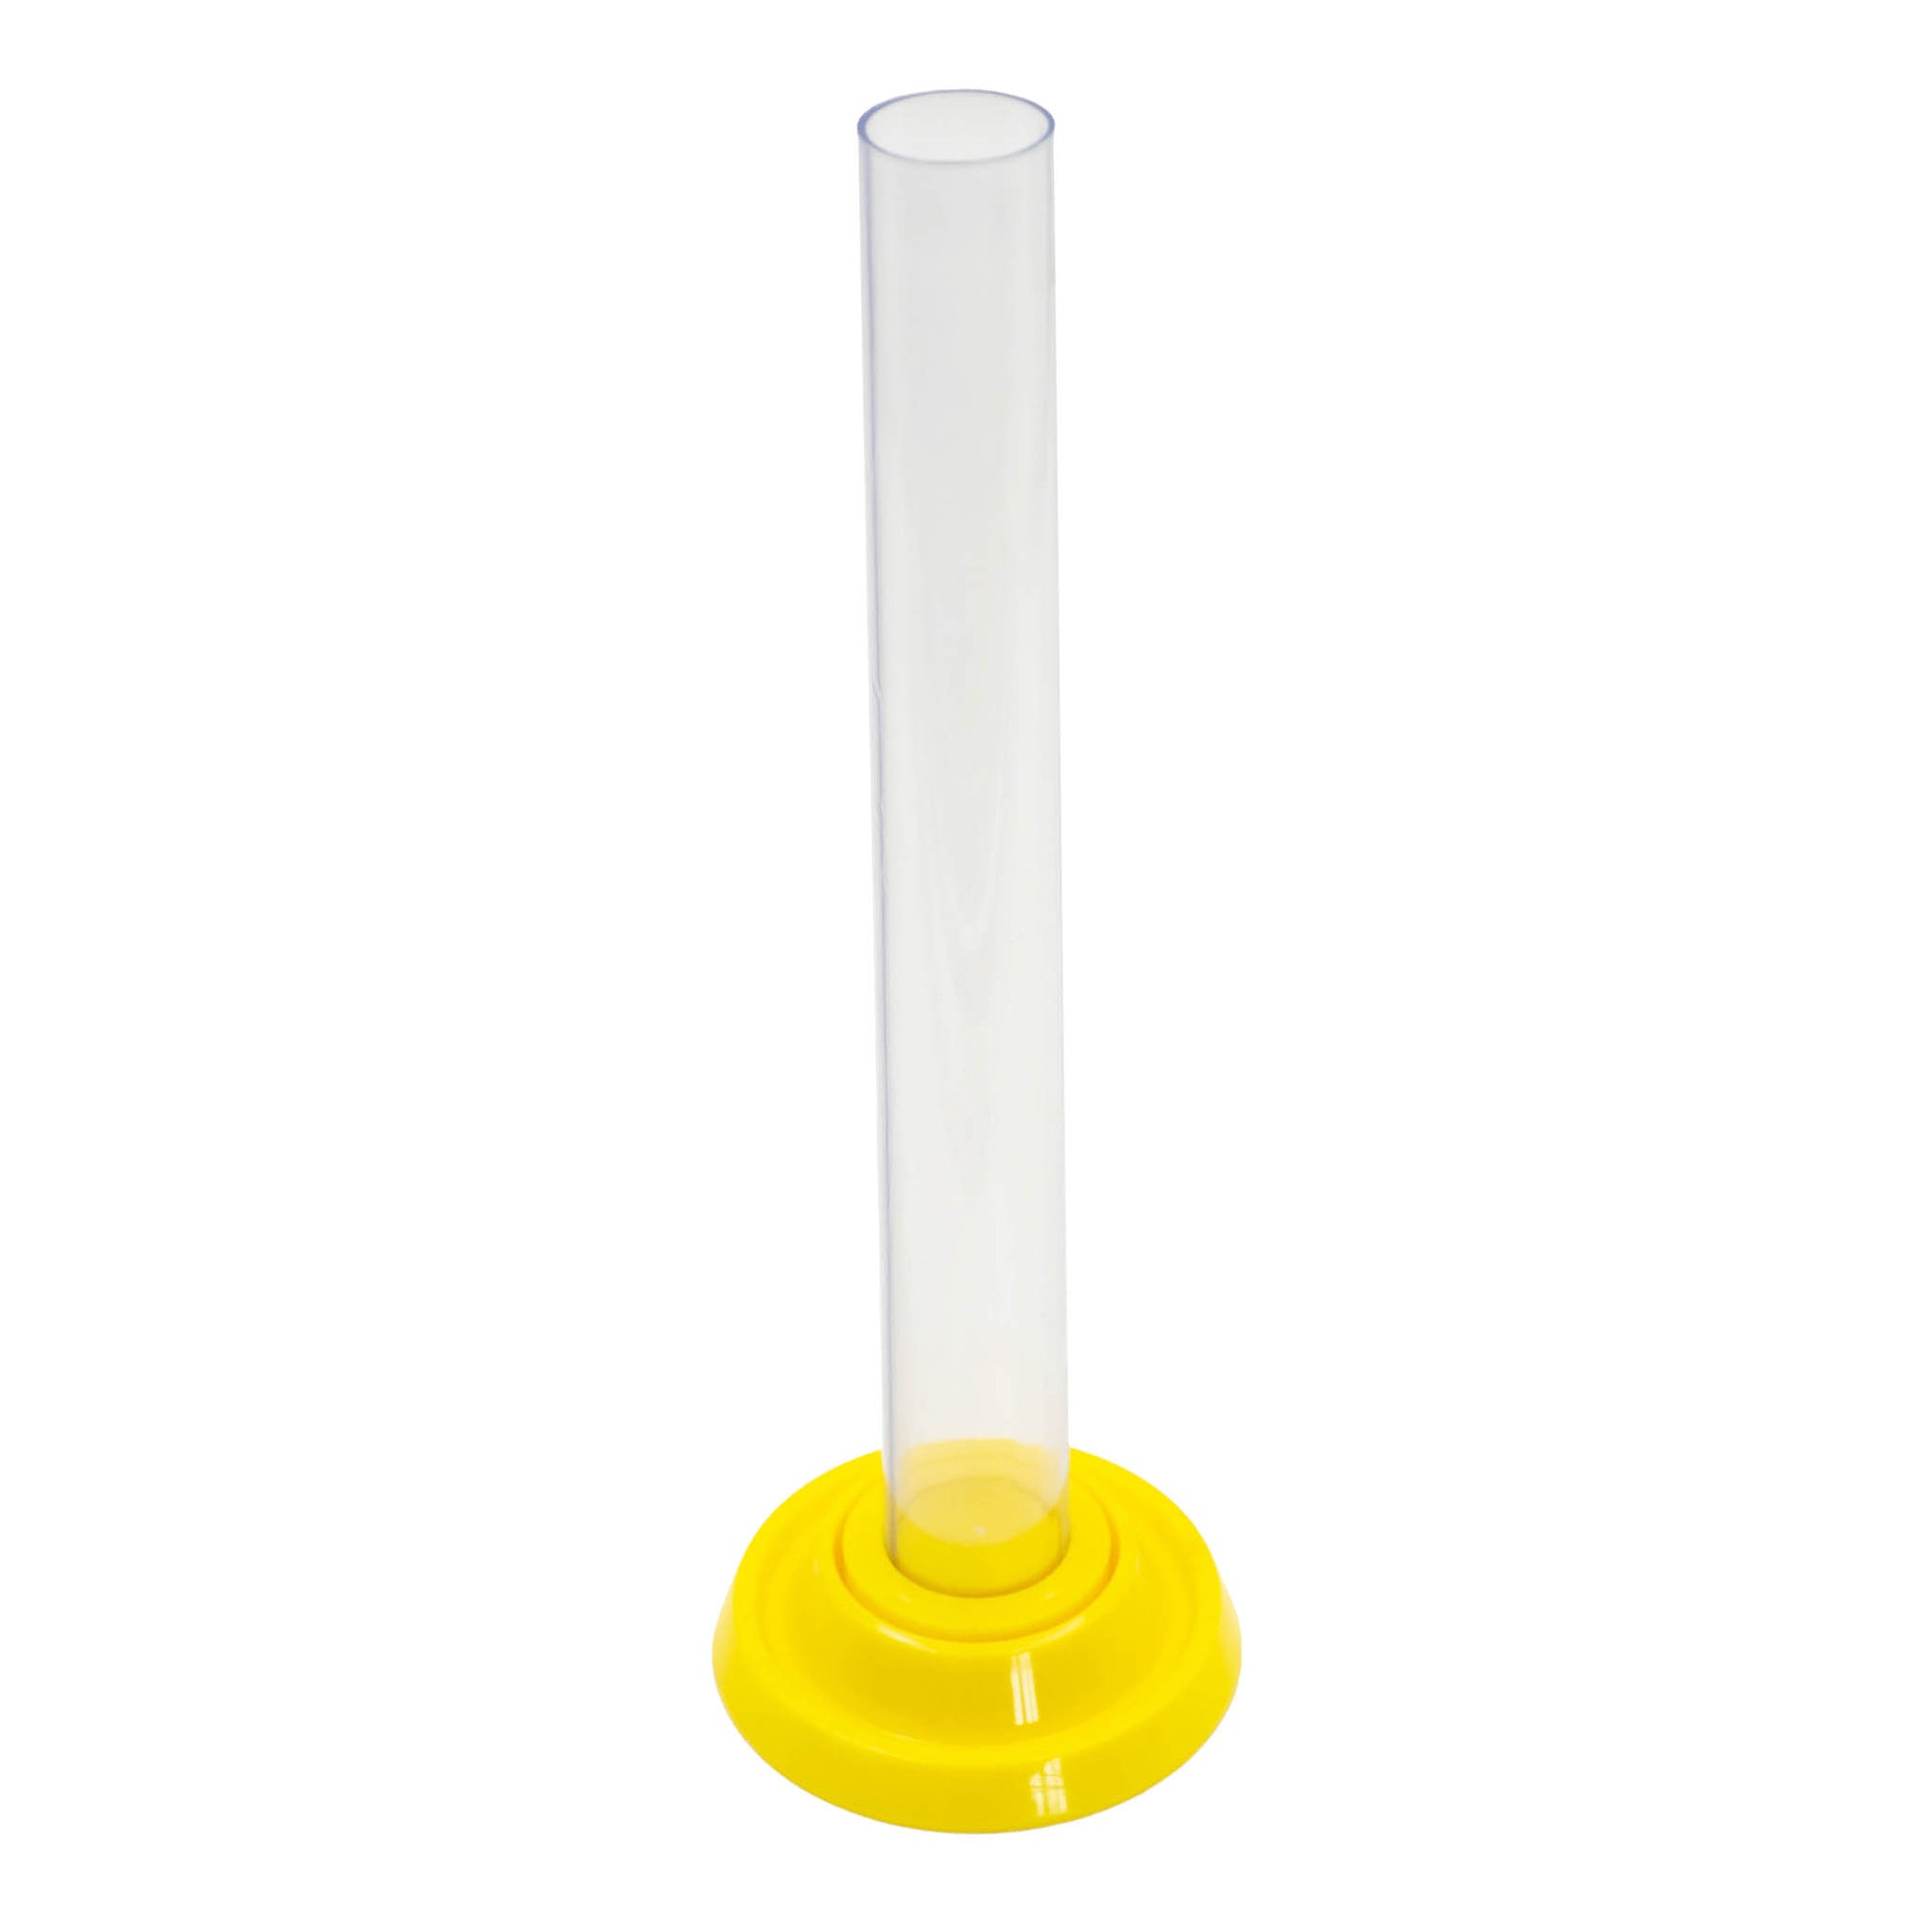 200ml food grade plastic test hydrometer. Used for testing samples of home brewed wine, beer and cider. 